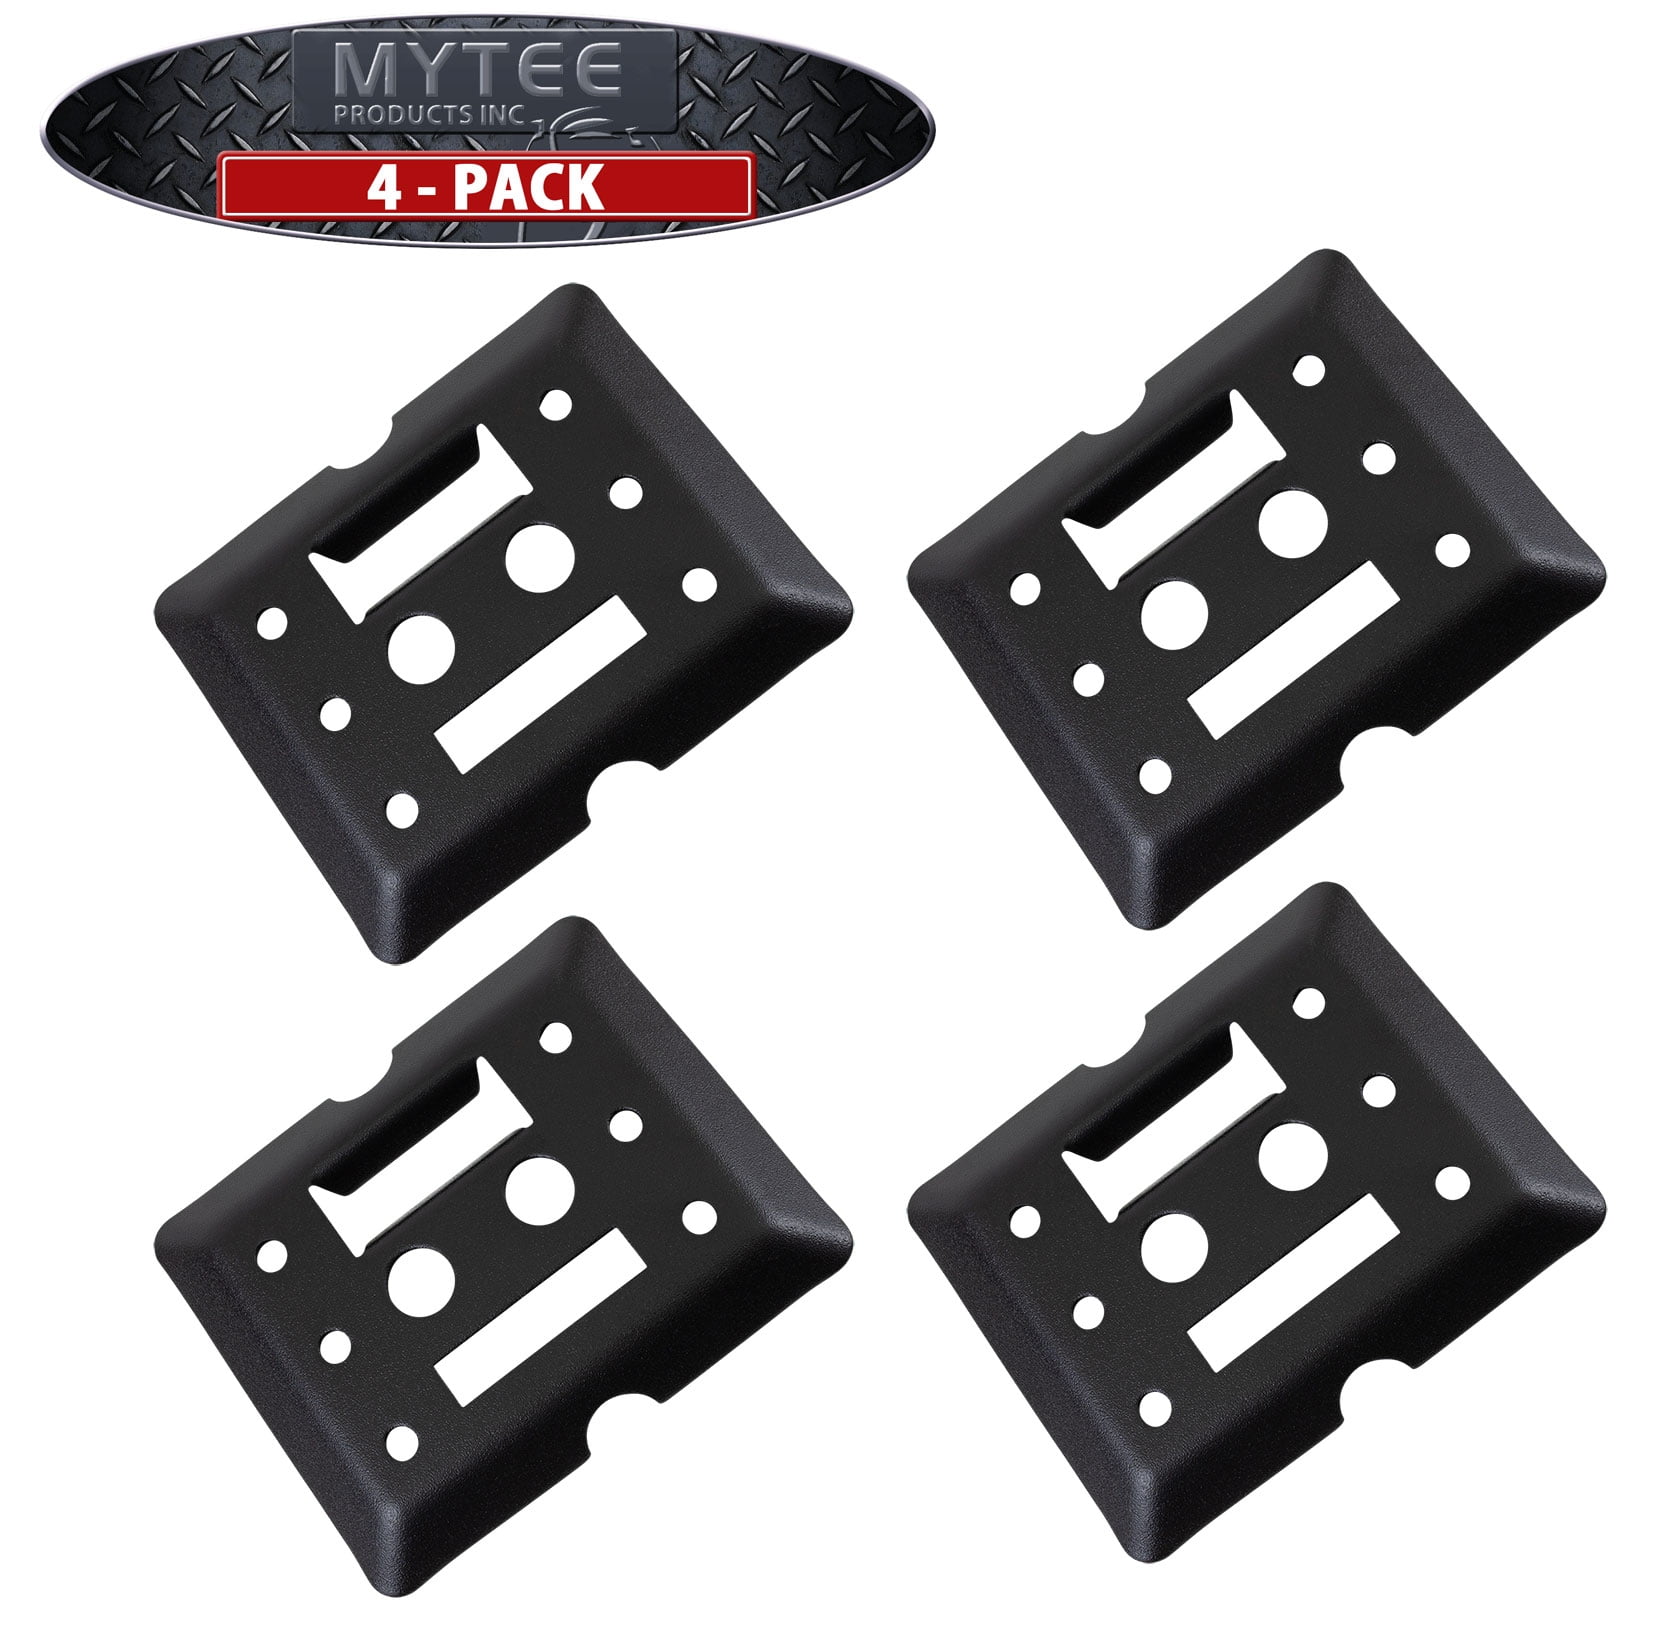 Mytee Products E-Track Tie Down Mini Trailer Plates 6 x 5, 2 Etrack & 2 F  Track Slots Heavy Duty Black Steel, Bolt-on Etracks Cargo Tie-Downs  for Trucks, Vans, Trailers, Boats (4 Pack) 